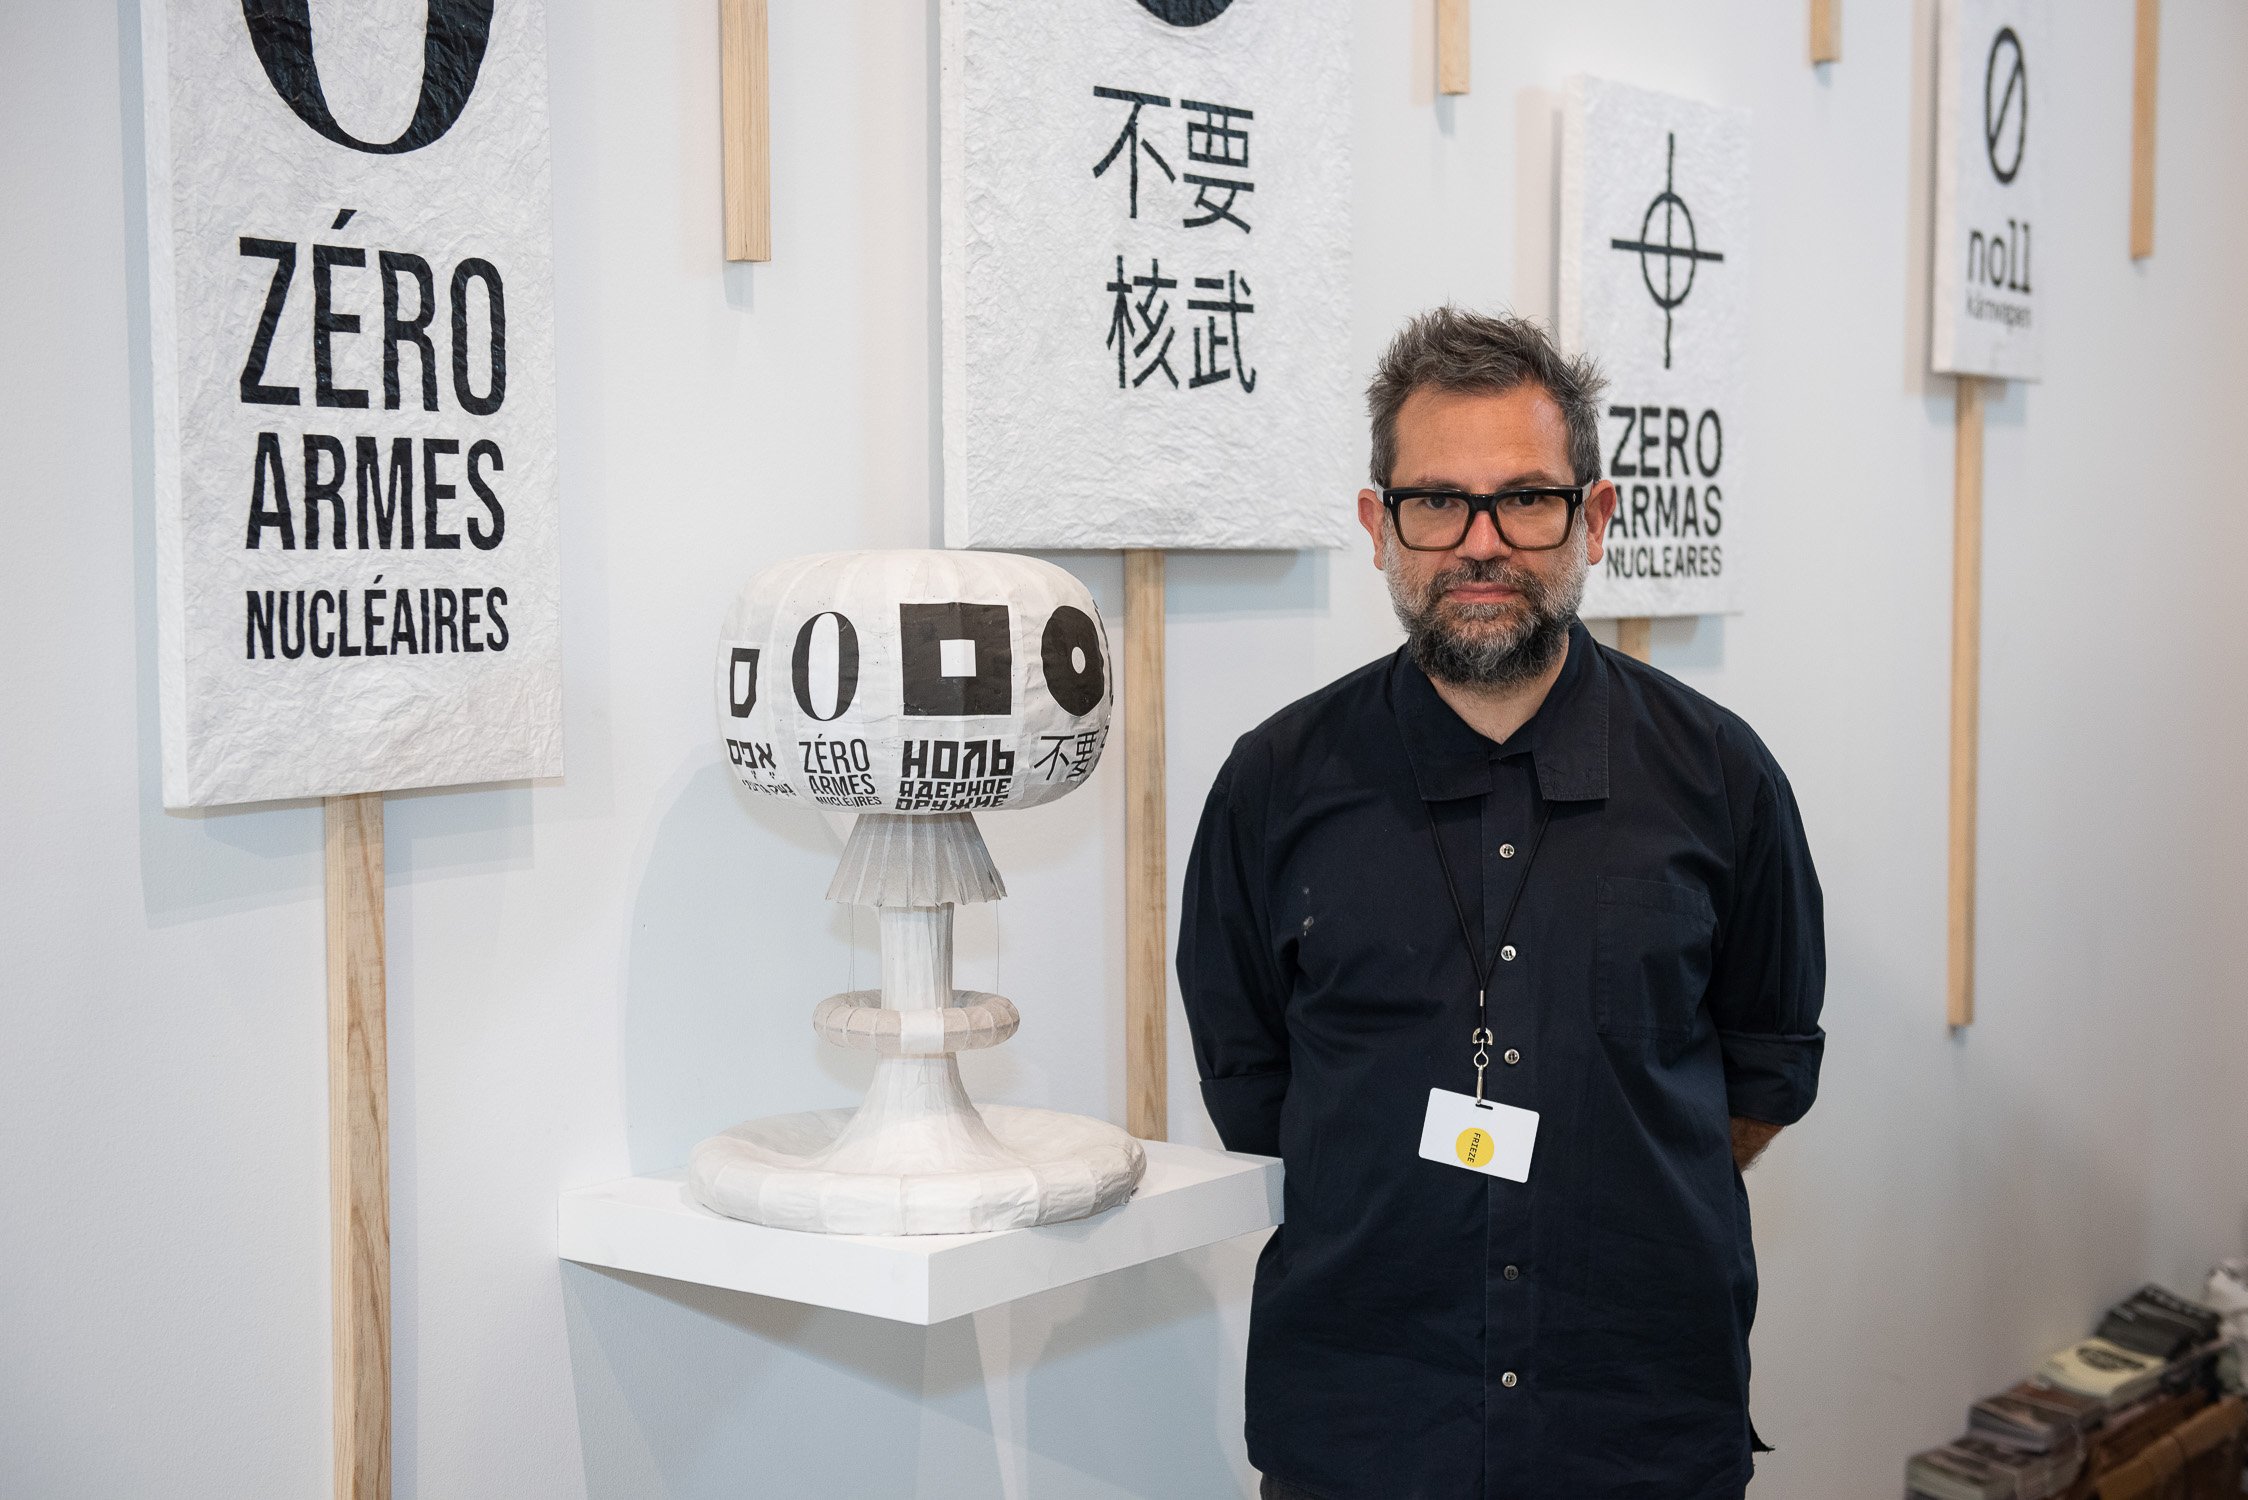 ‘No One Should Have the Power to Kill Us All’: Artist Pedro Reyes Is Mounting a Global Campaign for Nuclear Disarmament